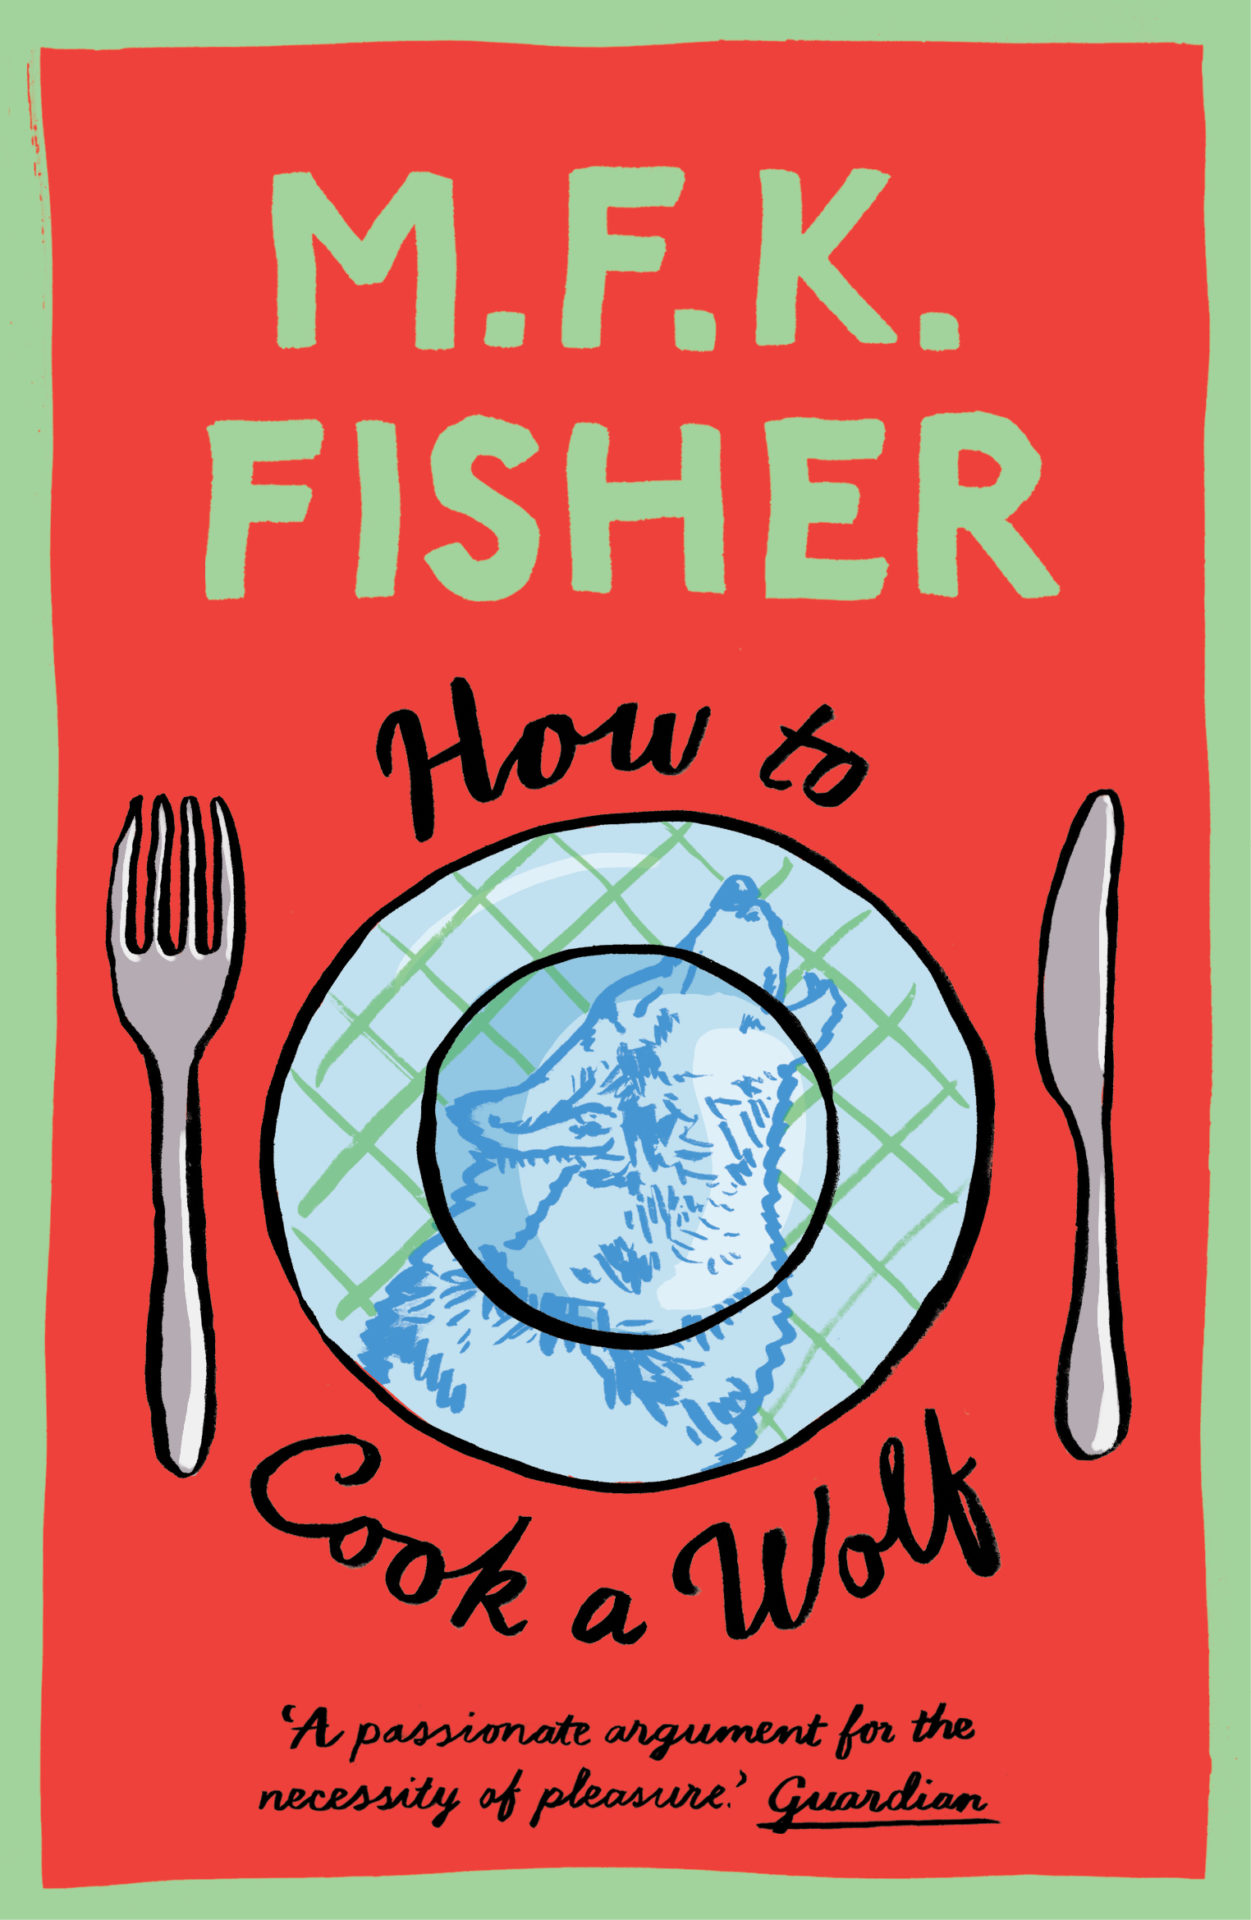 How to Cook a Wolf by M.F.K. Fisher